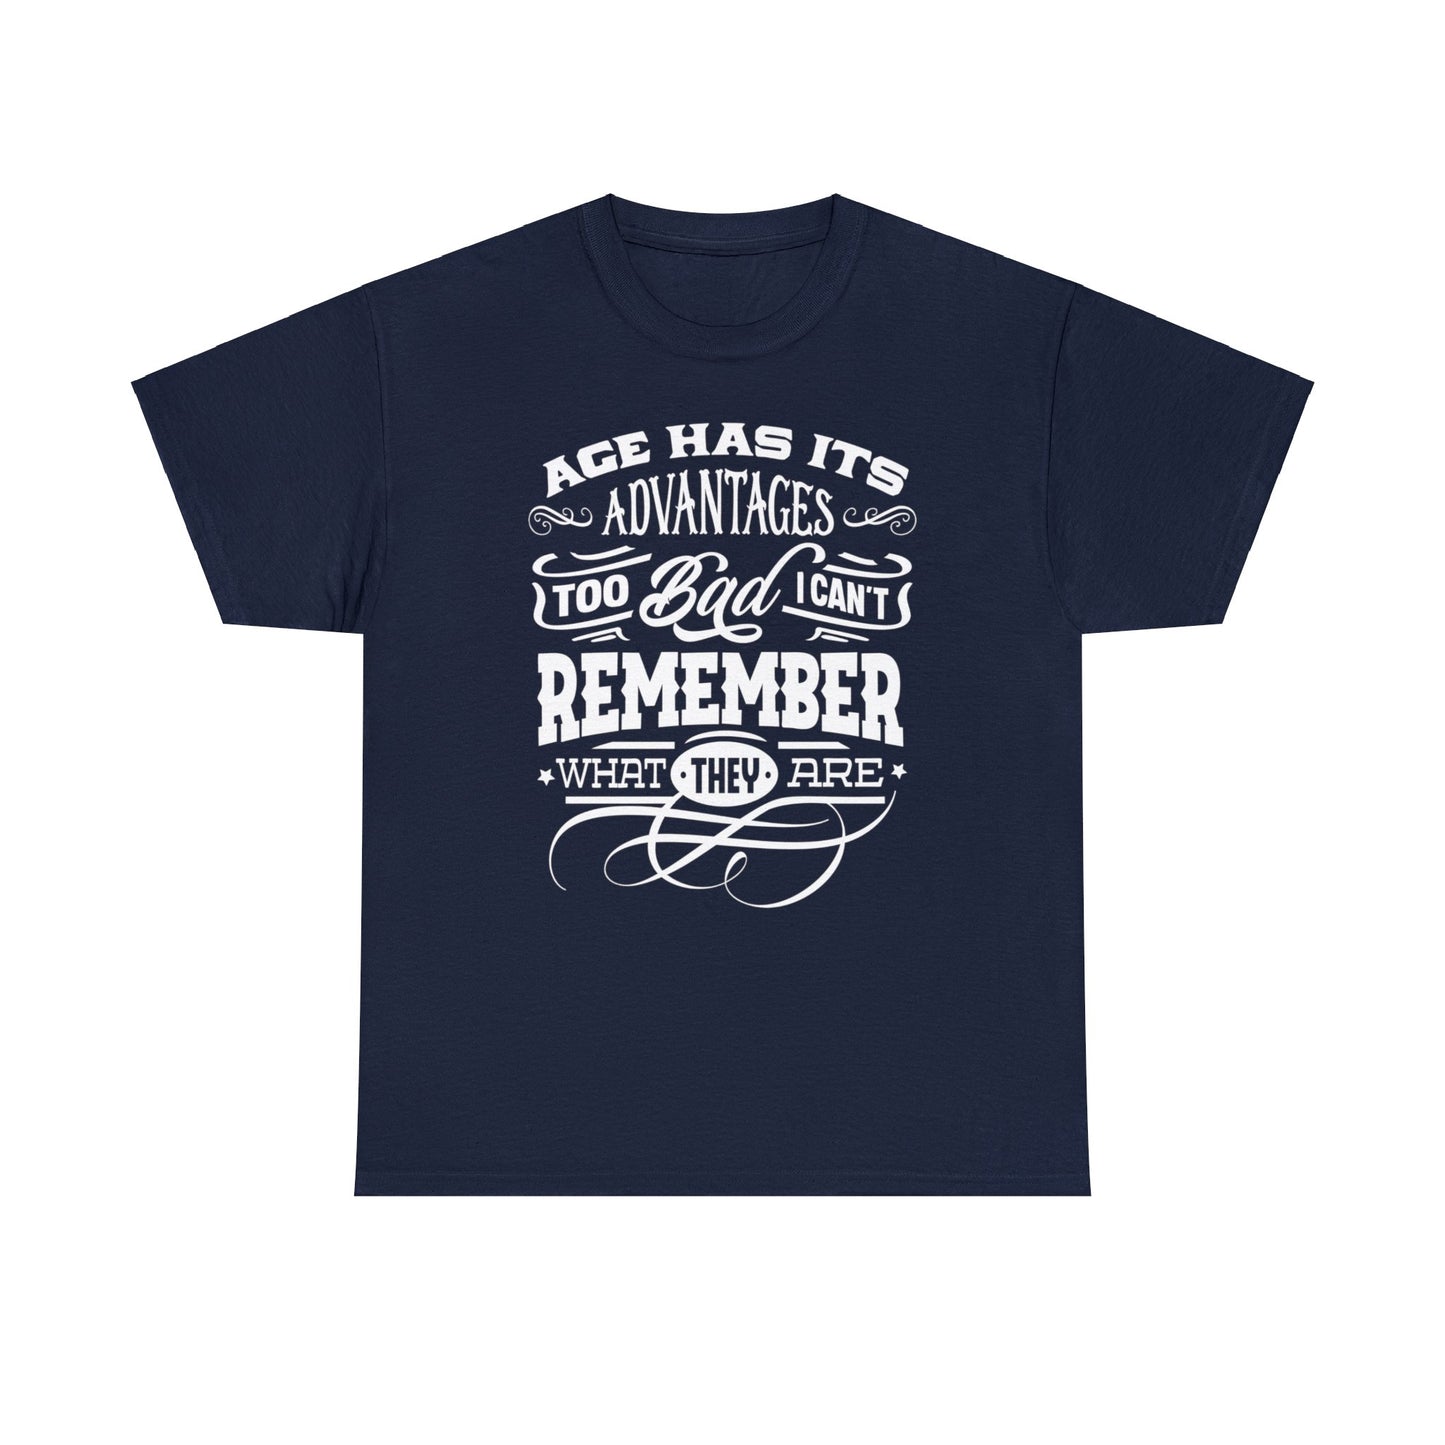 Aging T-Shirt For Getting Older T Shirt For Advantages TShirt For Birthday Gift Idea